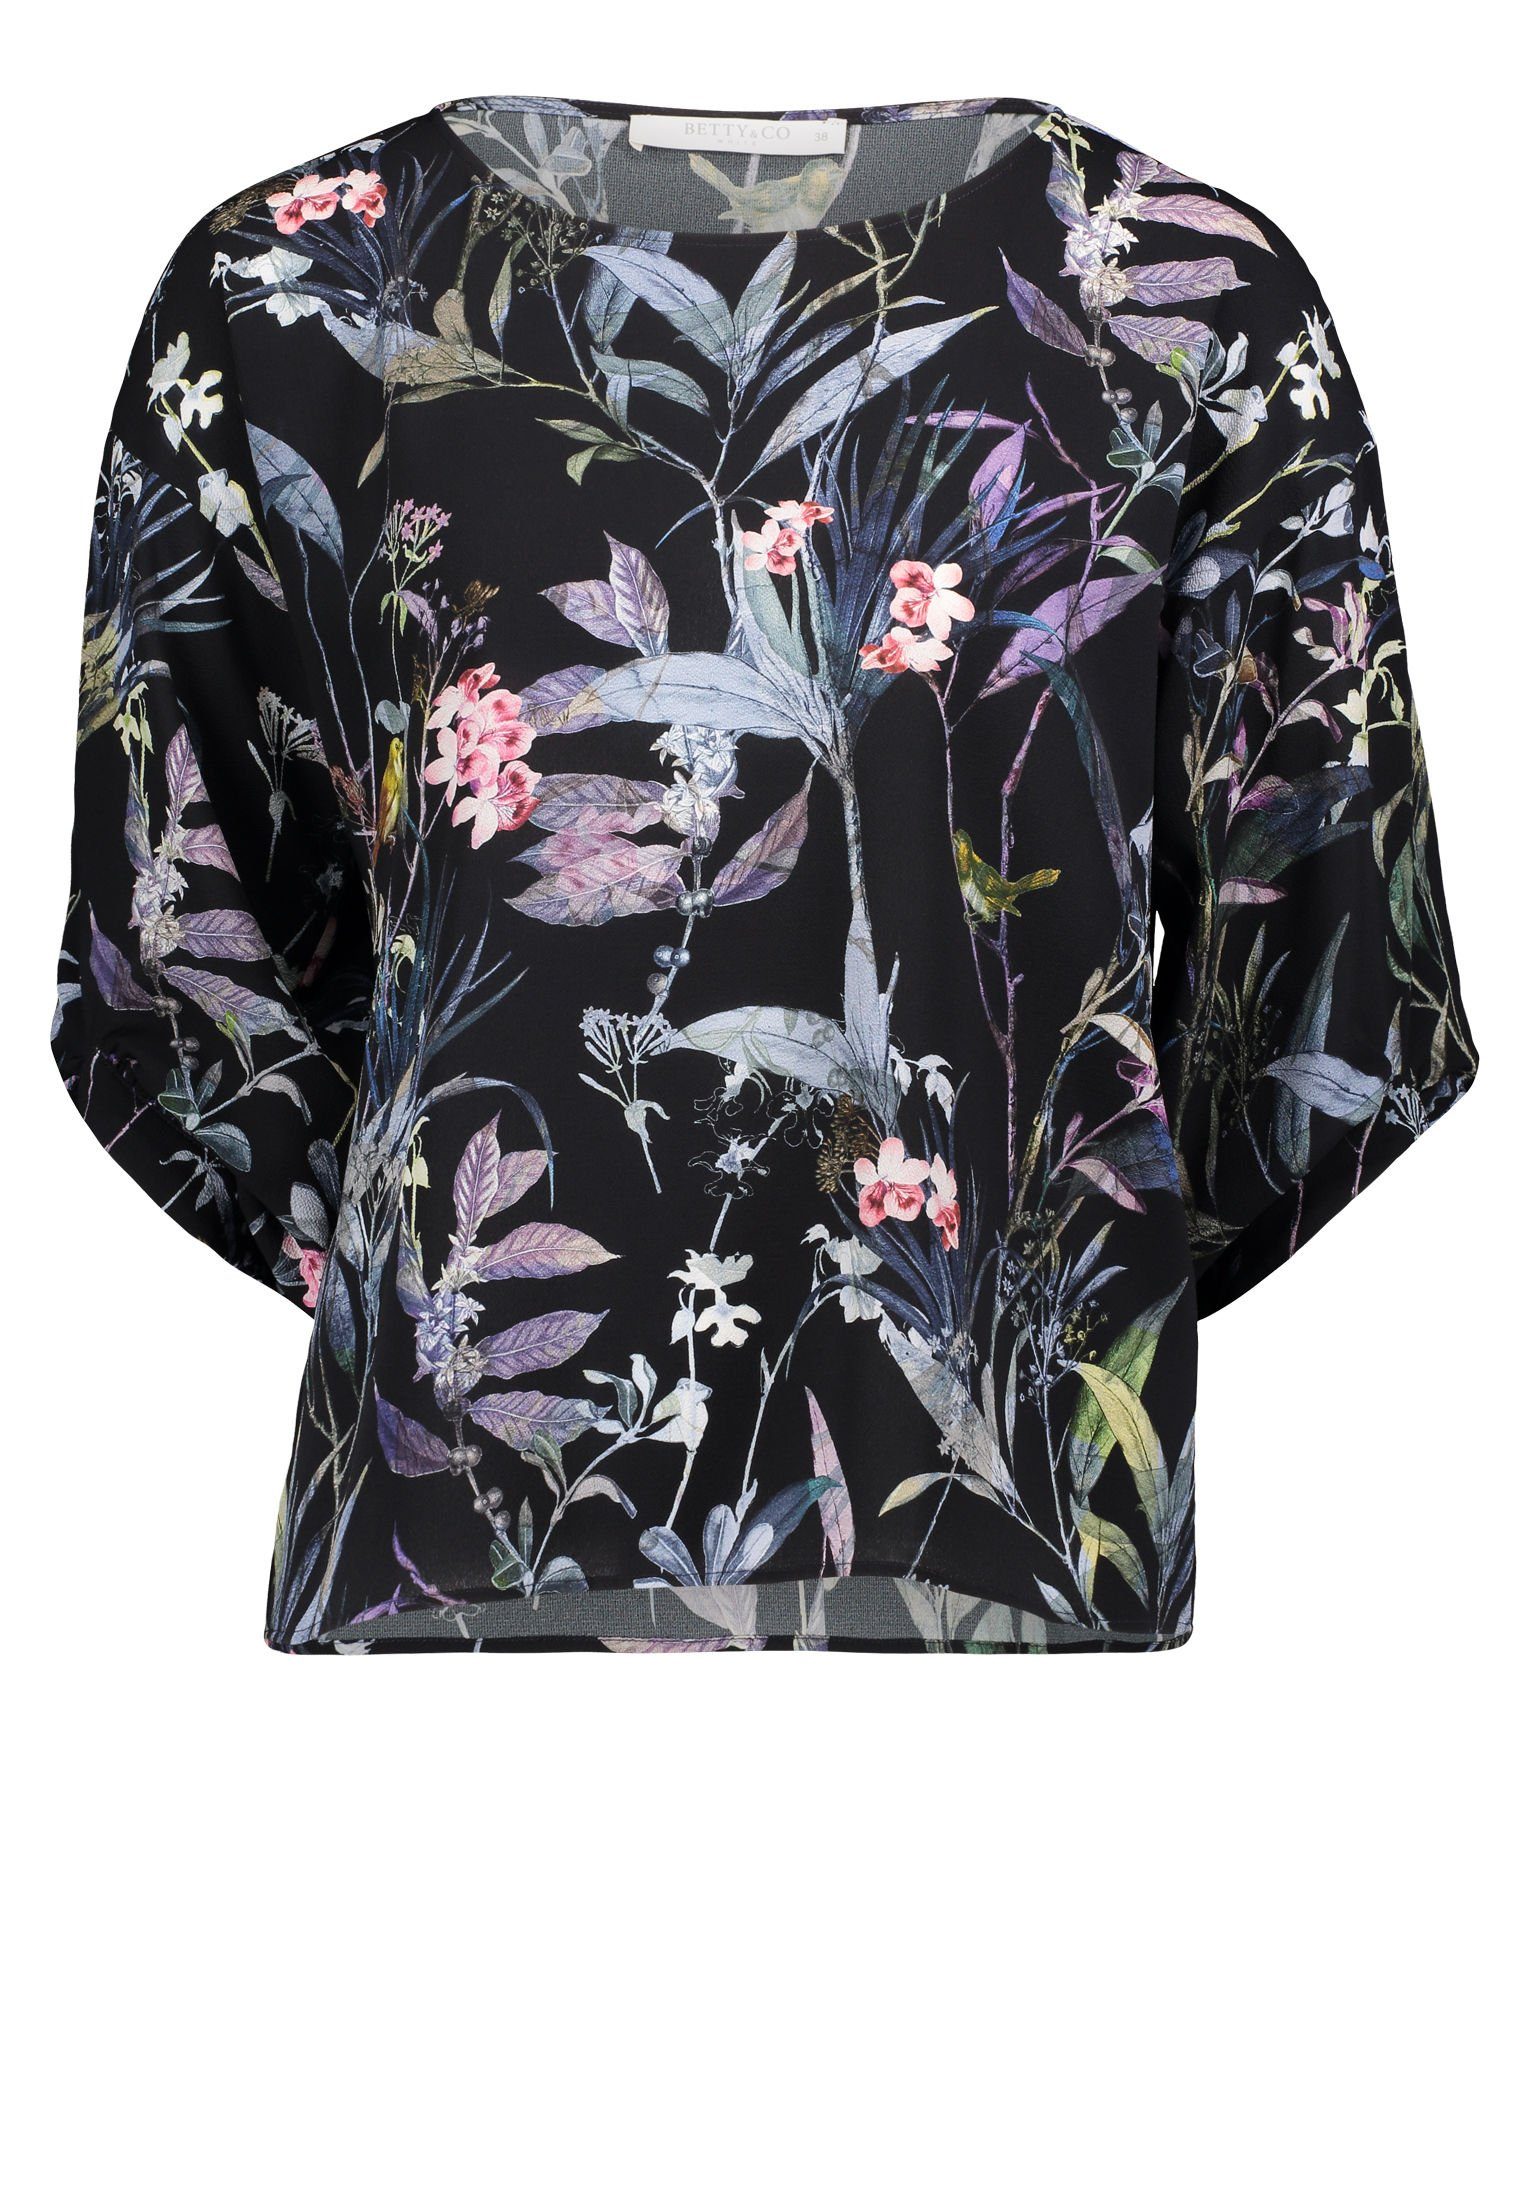 Otto - Betty&co NU 15% KORTING: Betty&Co Blouse